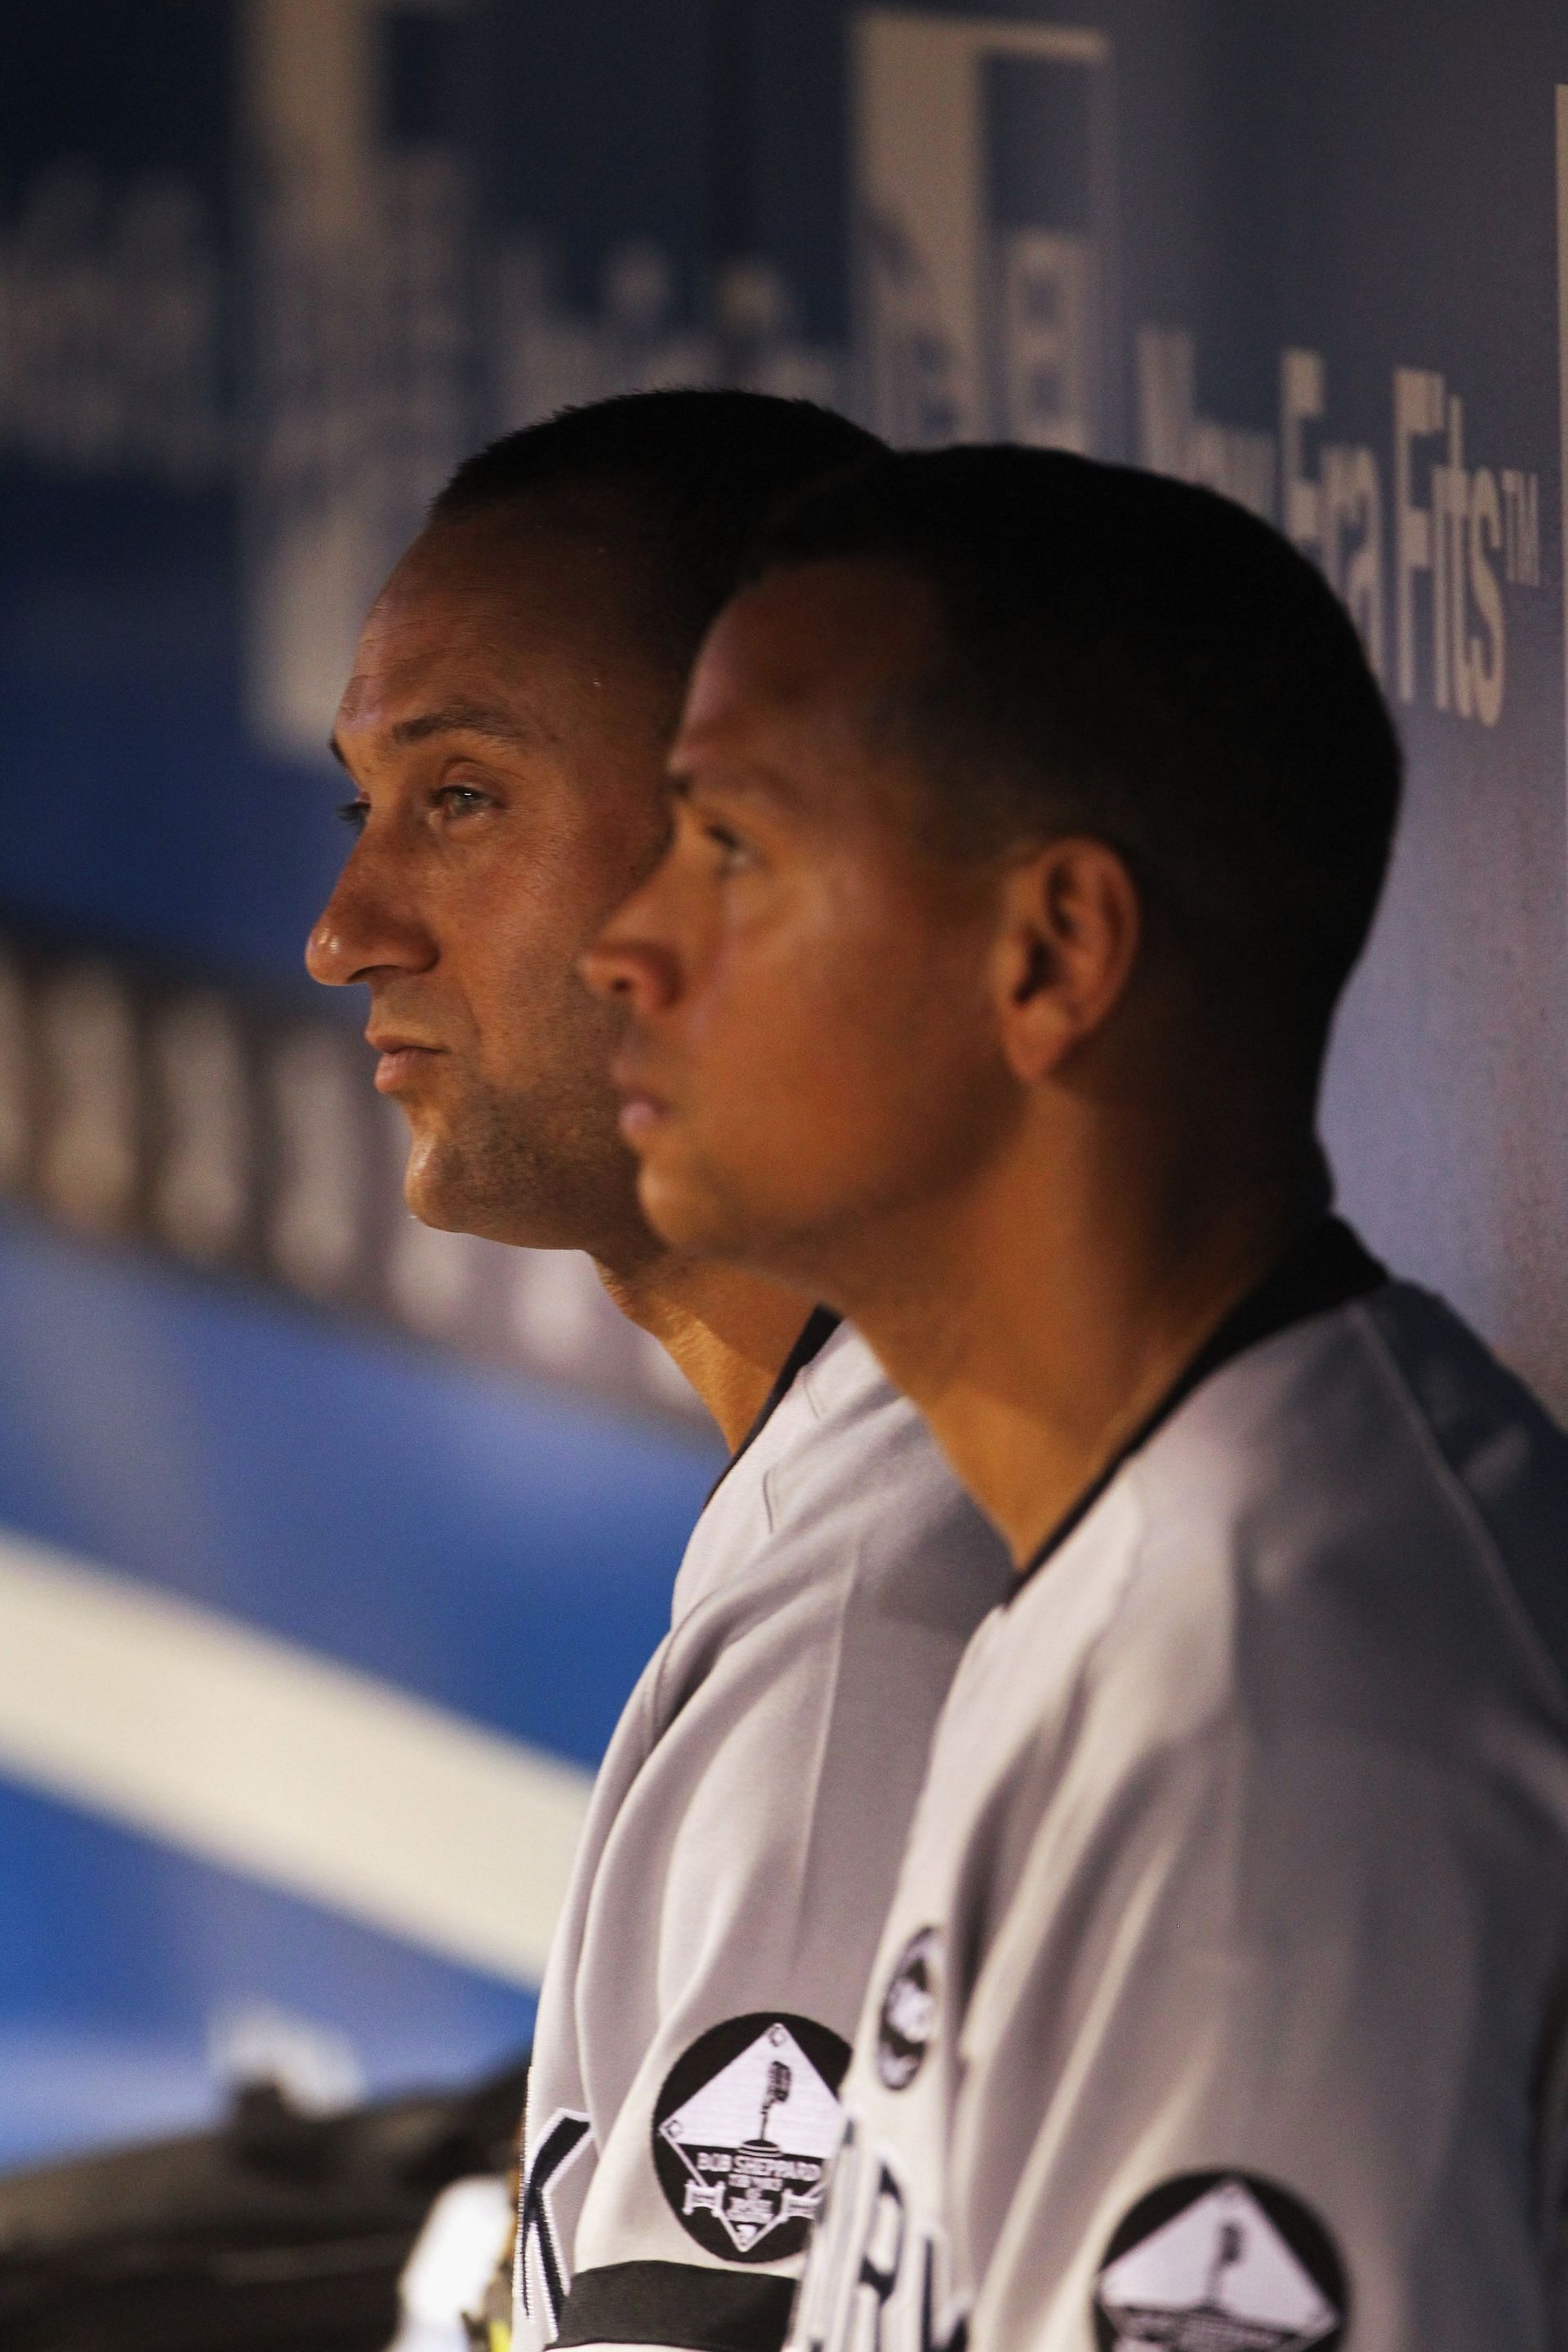 Derek Jeter #2 and Alex Rodriguez #13 of the New York Yankees watch from the dugout during the game against the Kansas City Royals on August 13, 2010 at Kauffman Stadium in Kansas City, Missouri.